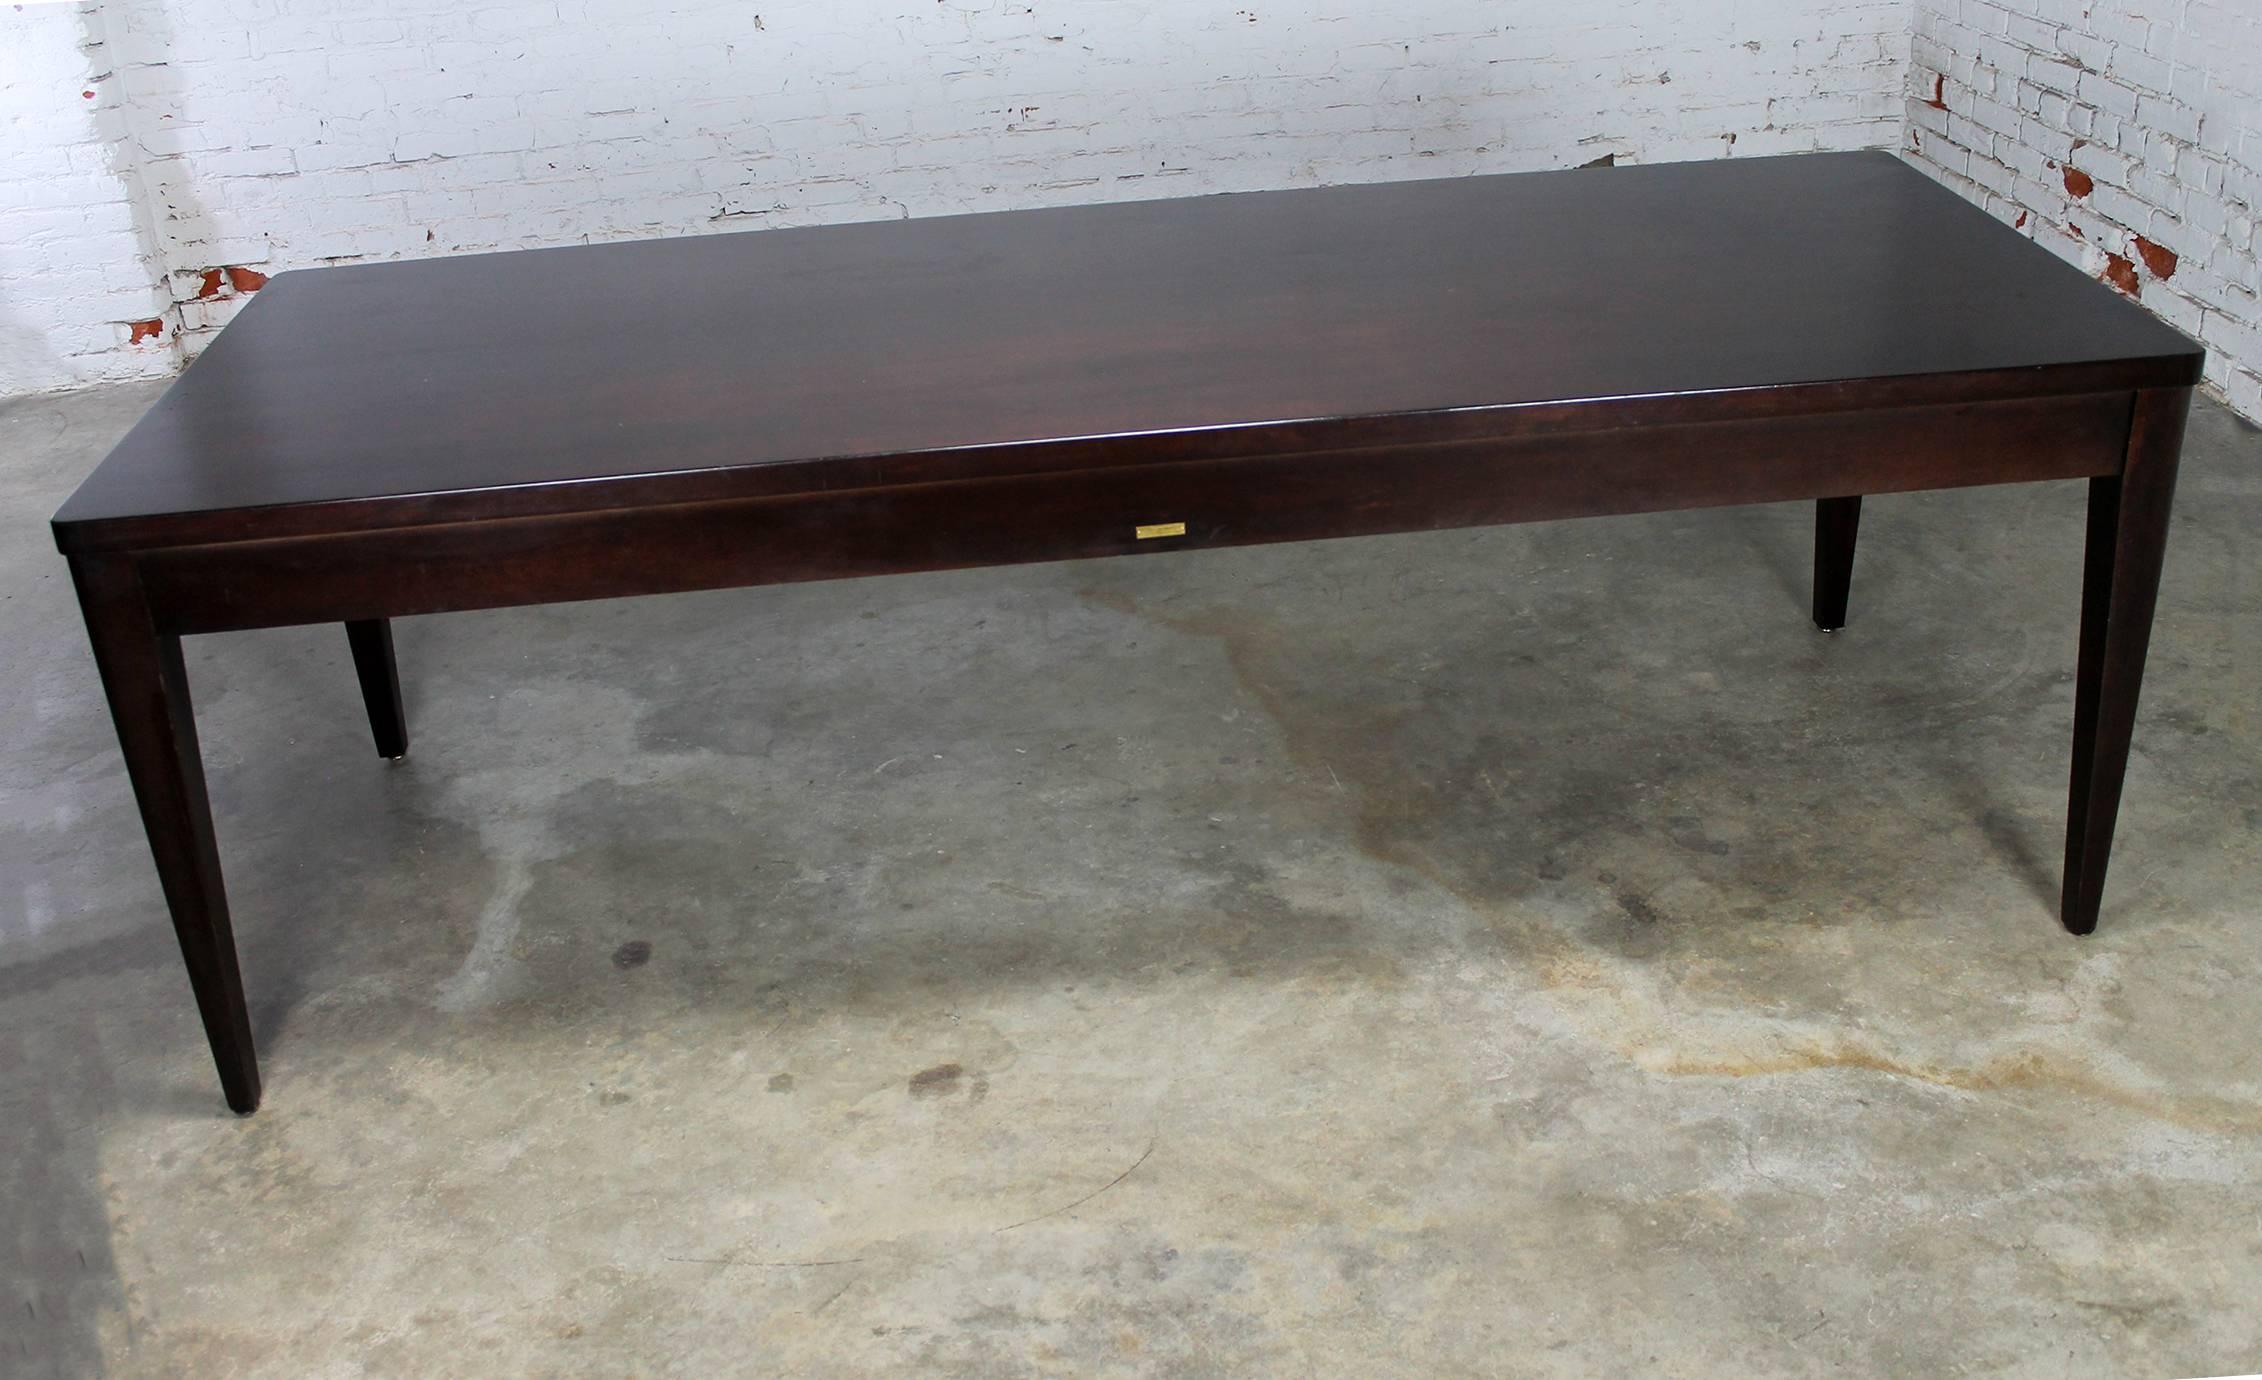 Gorgeous vintage Mid-Century library or schoolhouse style dining table made by Bro-Dart Industries, circa 1960. This maple table has been refinished at some point in its life and stained a beautiful dark espresso brown. It is in fabulous condition